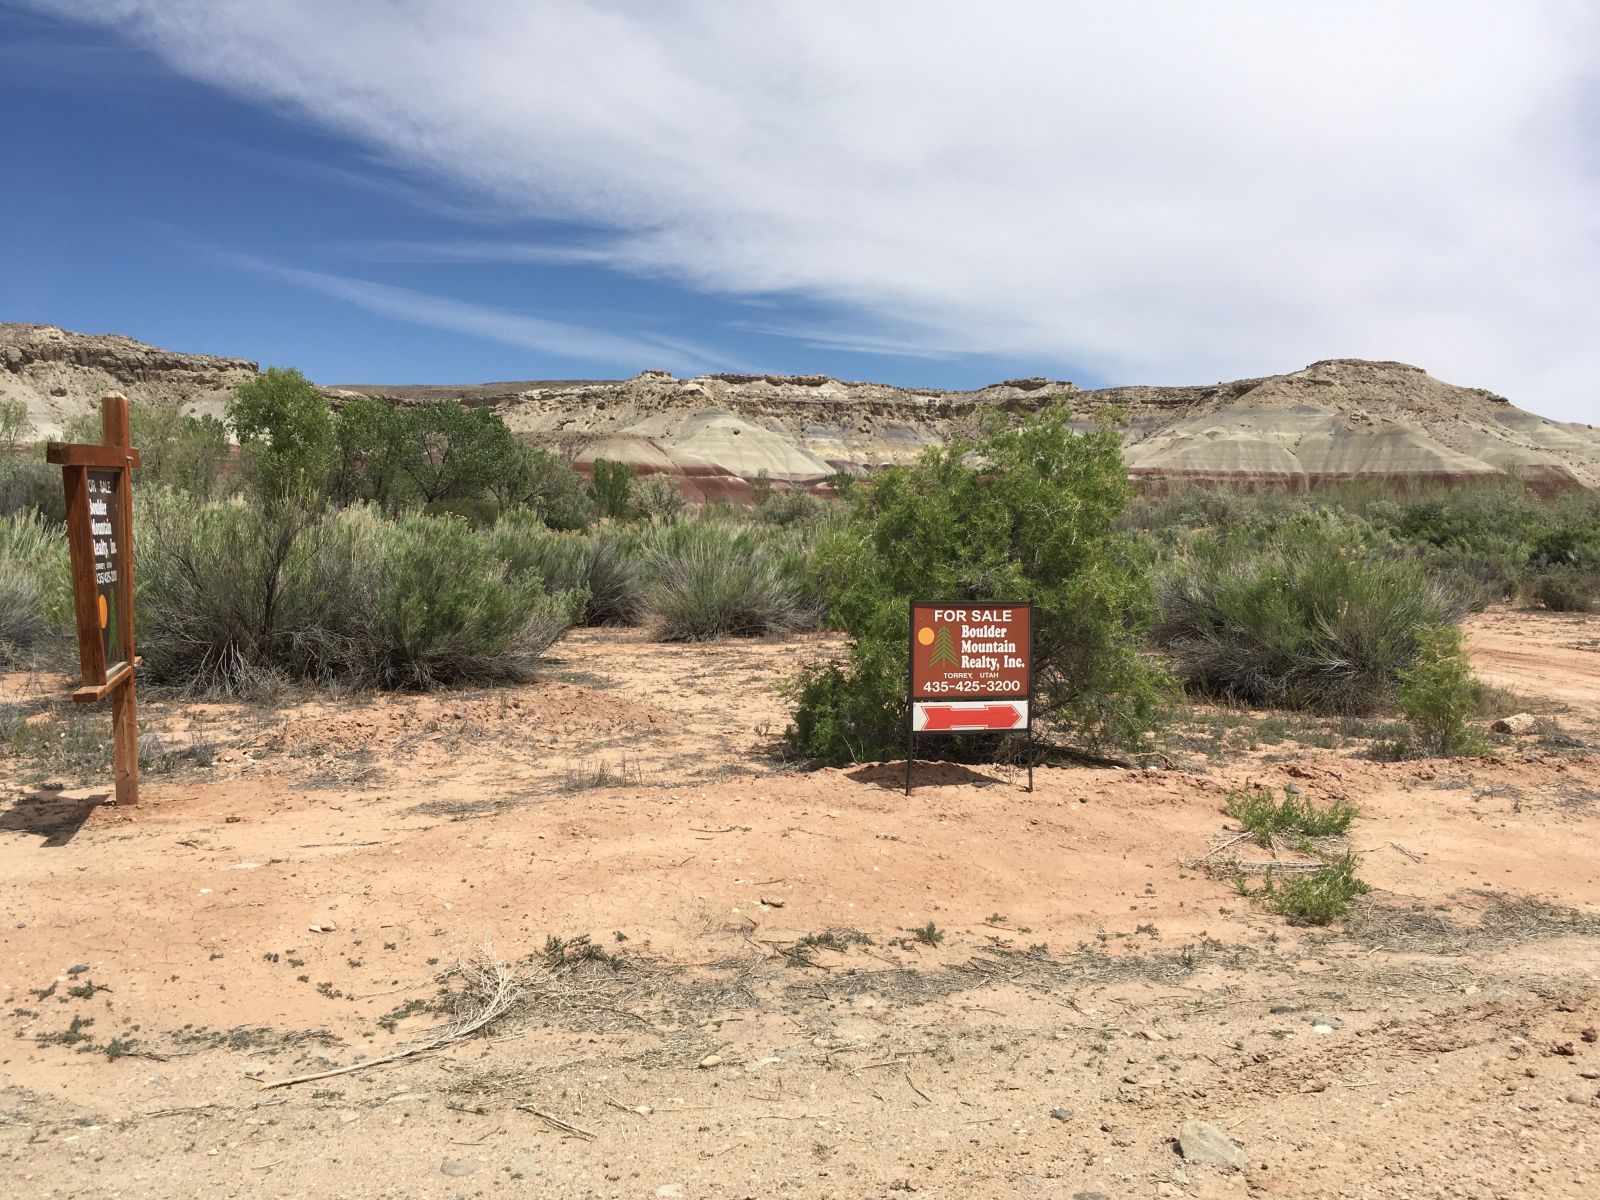 Yet another parcel of land that I would buy tout suite - near the entrance to Capitol Reef National Park’s Cathedral Valley. 